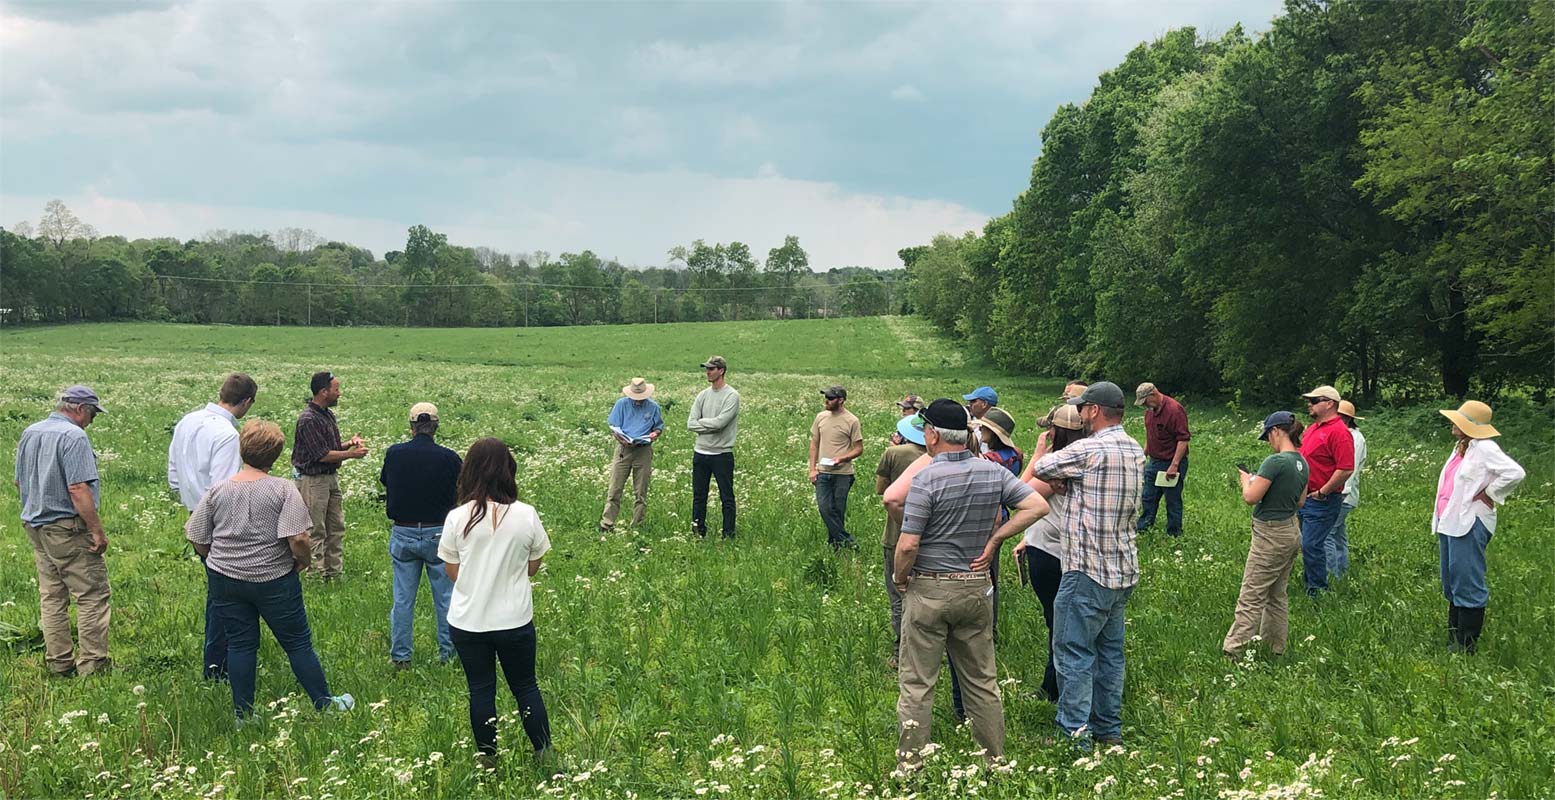 Farmers at an organic field day discuss practices to improve soil health and increase nutrient density in crops.